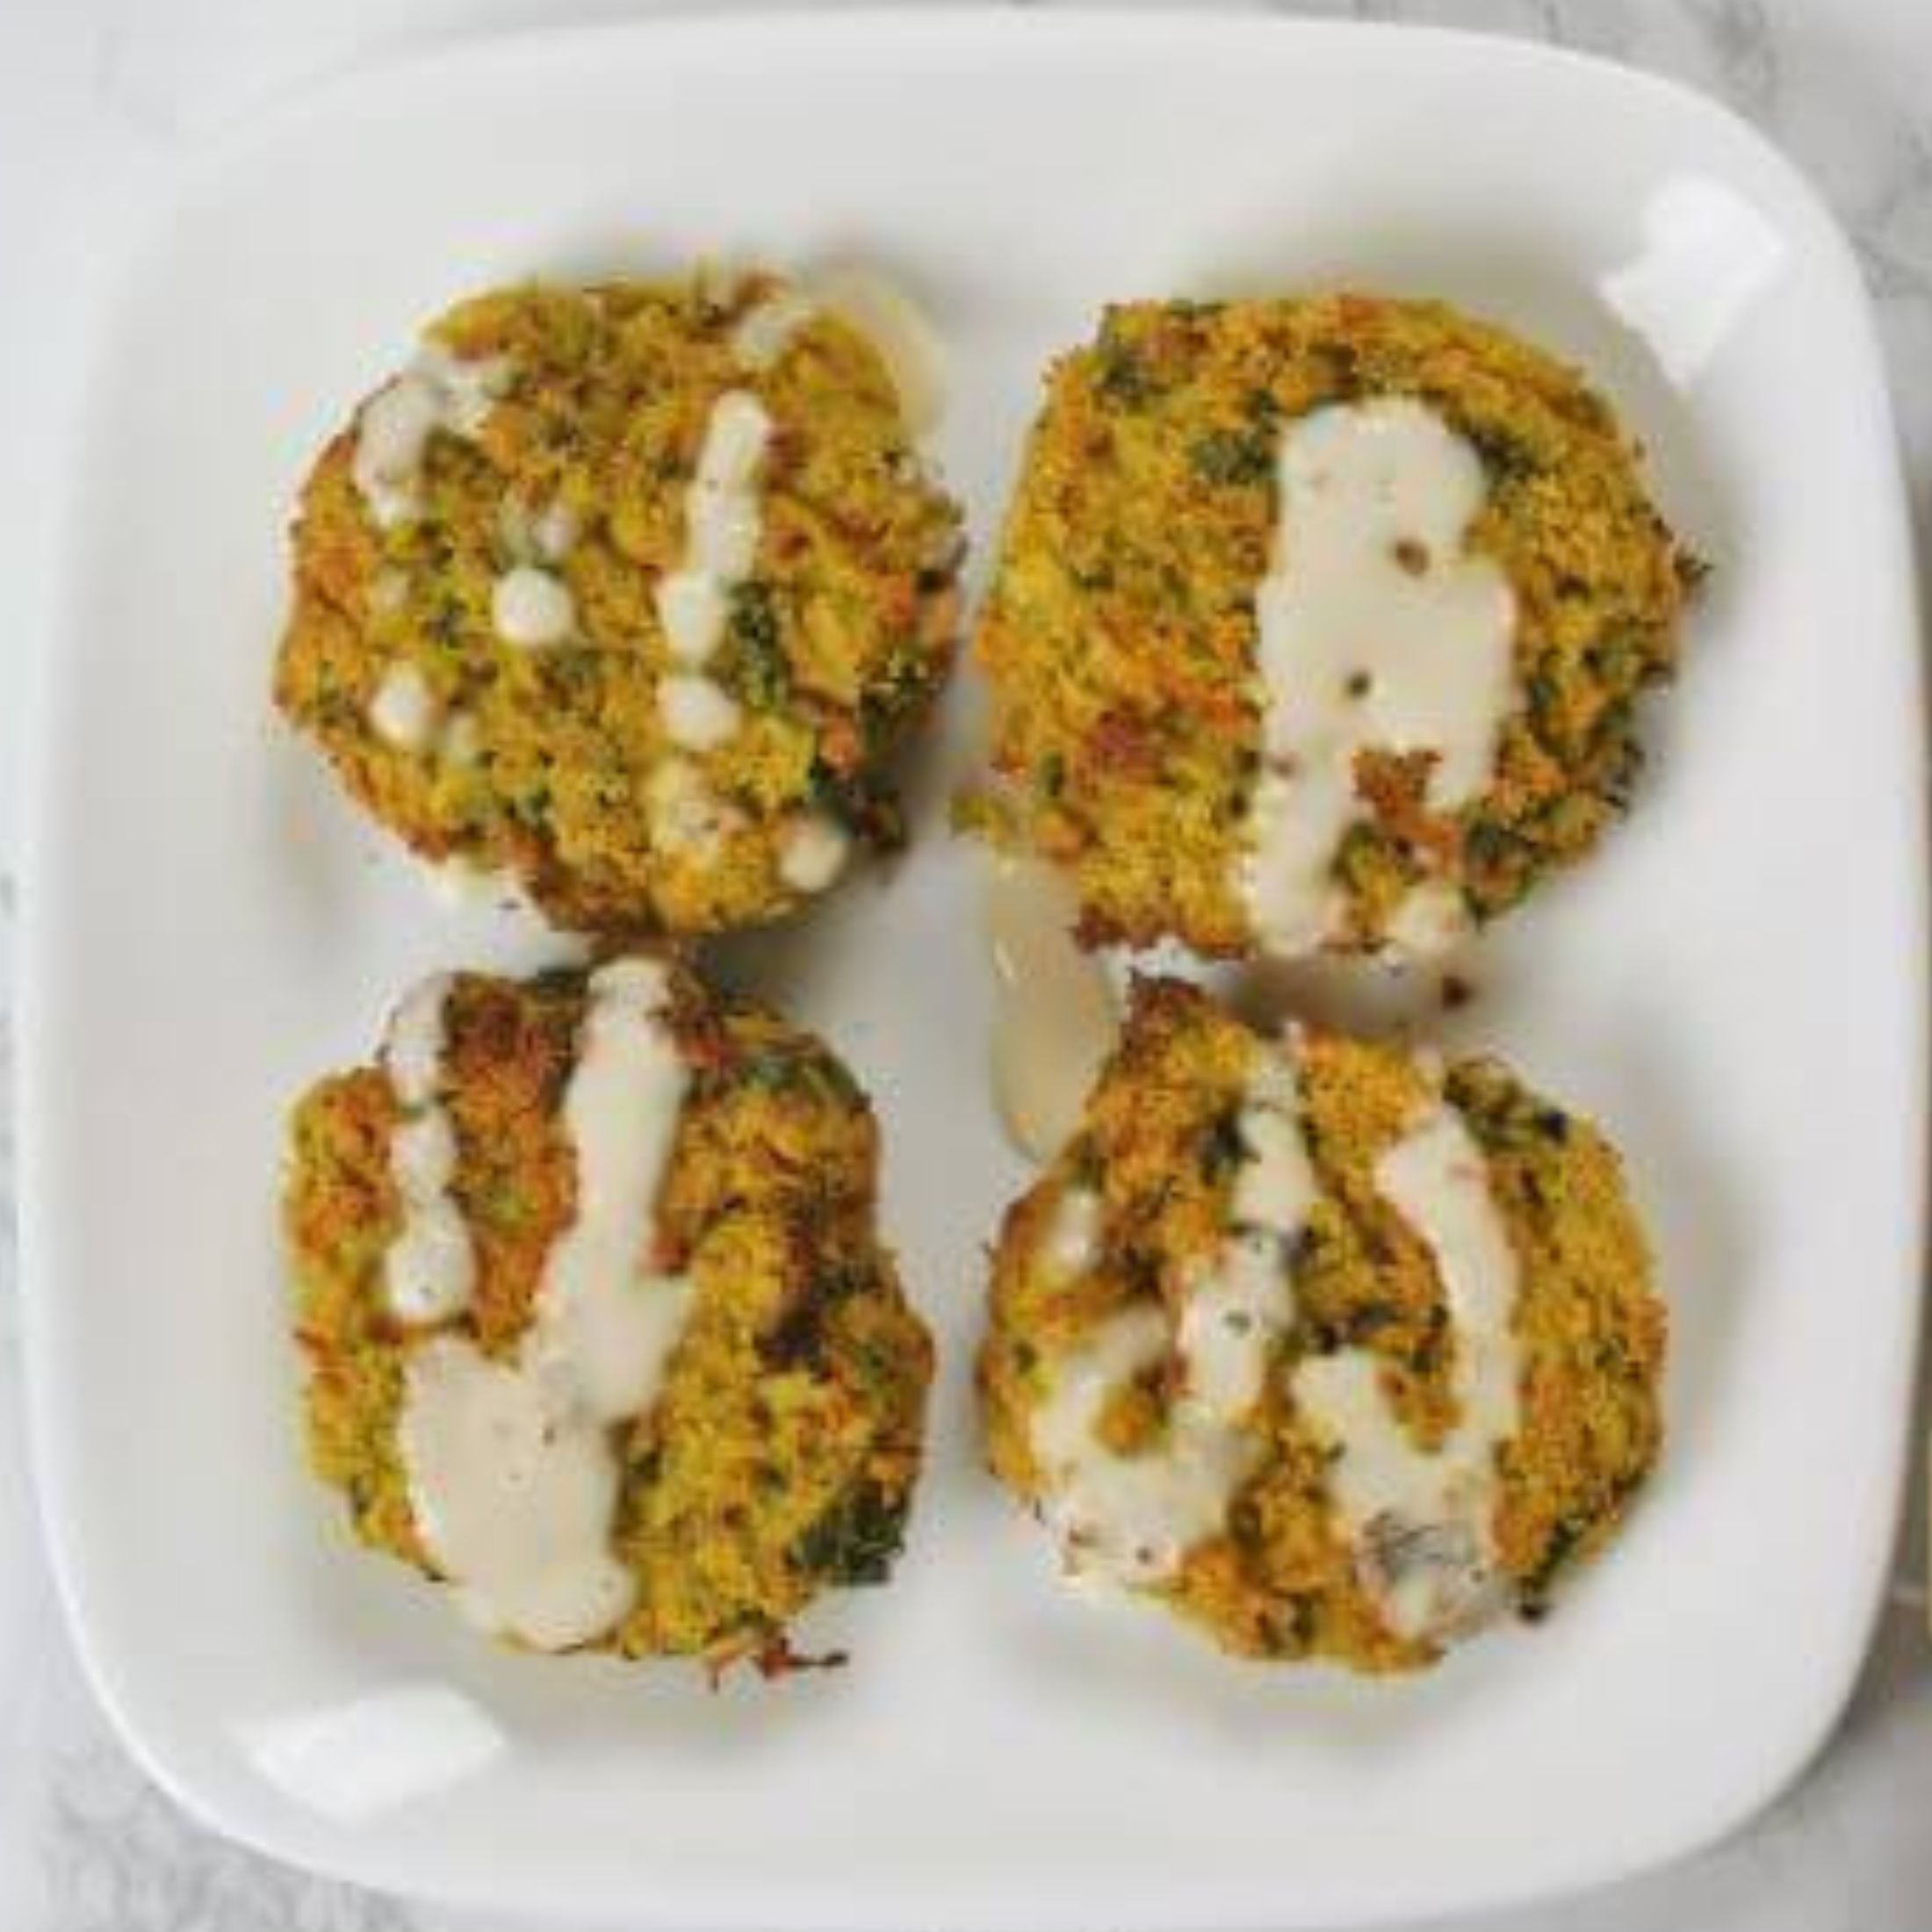 Four Falafel made from Chickpeas, Cauliflower and Turmeric Seasoning